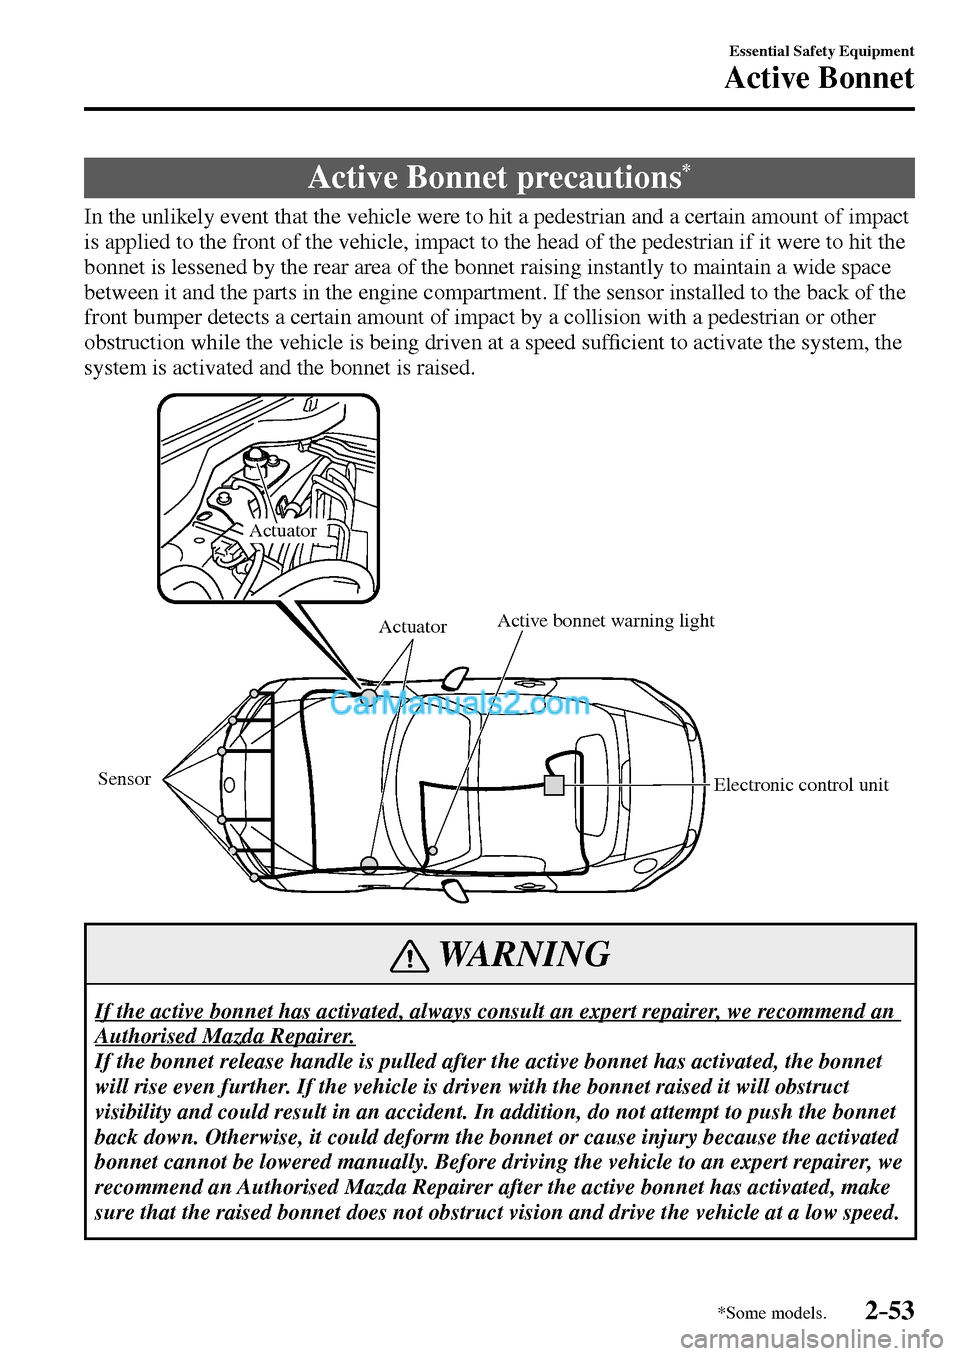 MAZDA MODEL MX-5 2017  Owners Manual - RHD (UK, Australia) (in English) 2–53
Essential Safety Equipment
Active Bonnet
*Some models.
      Active  Bonnet  precautions *
    In the unlikely event that the vehicle were to hit a pedestrian and a certain amount of impact 
is